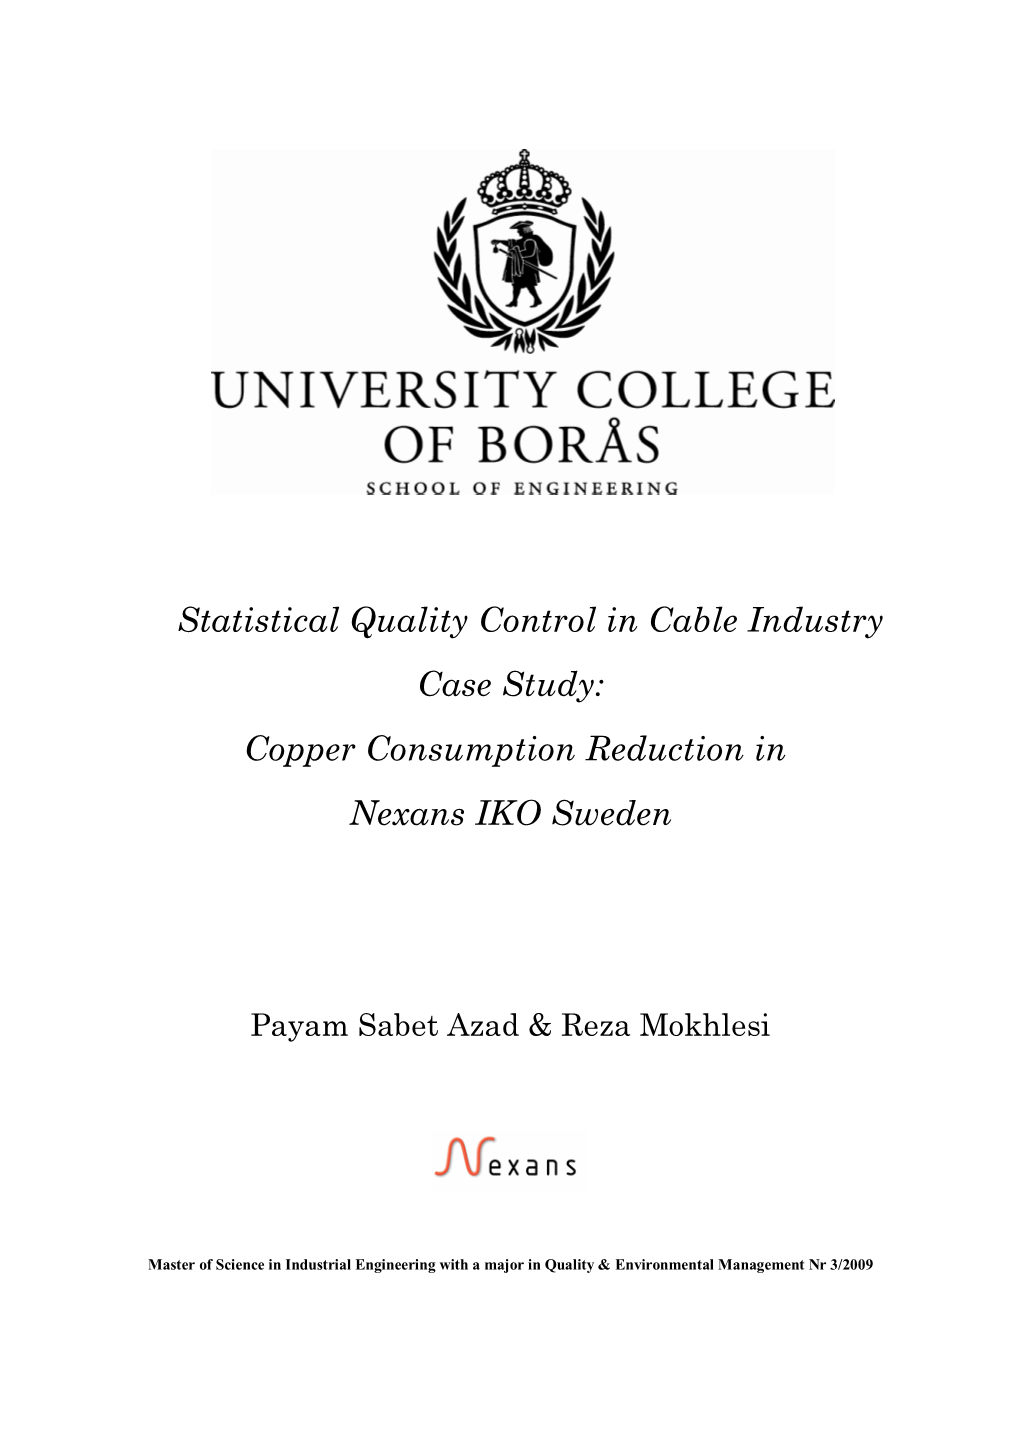 Statistical Quality Control in Cable Industry Case Study: Copper Consumption Reduction in Nexans IKO Sweden